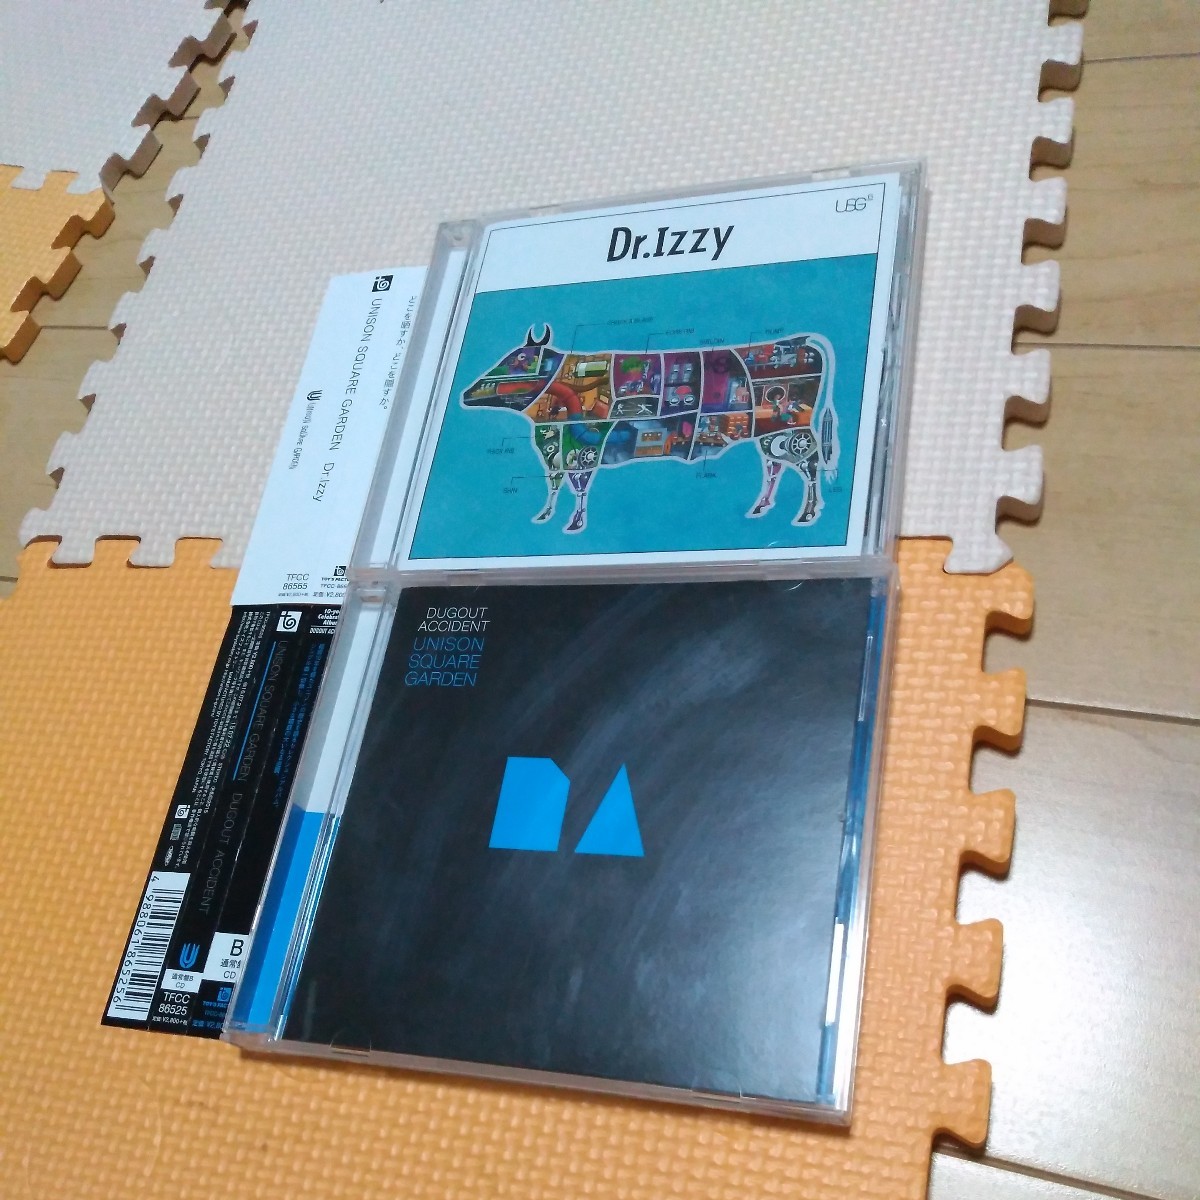 UNISON SQUARE GARDEN Dr.Izzy 通常盤 DUGOUT ACCIDENT 通常盤 CD セット アルバム ユニゾン_画像1